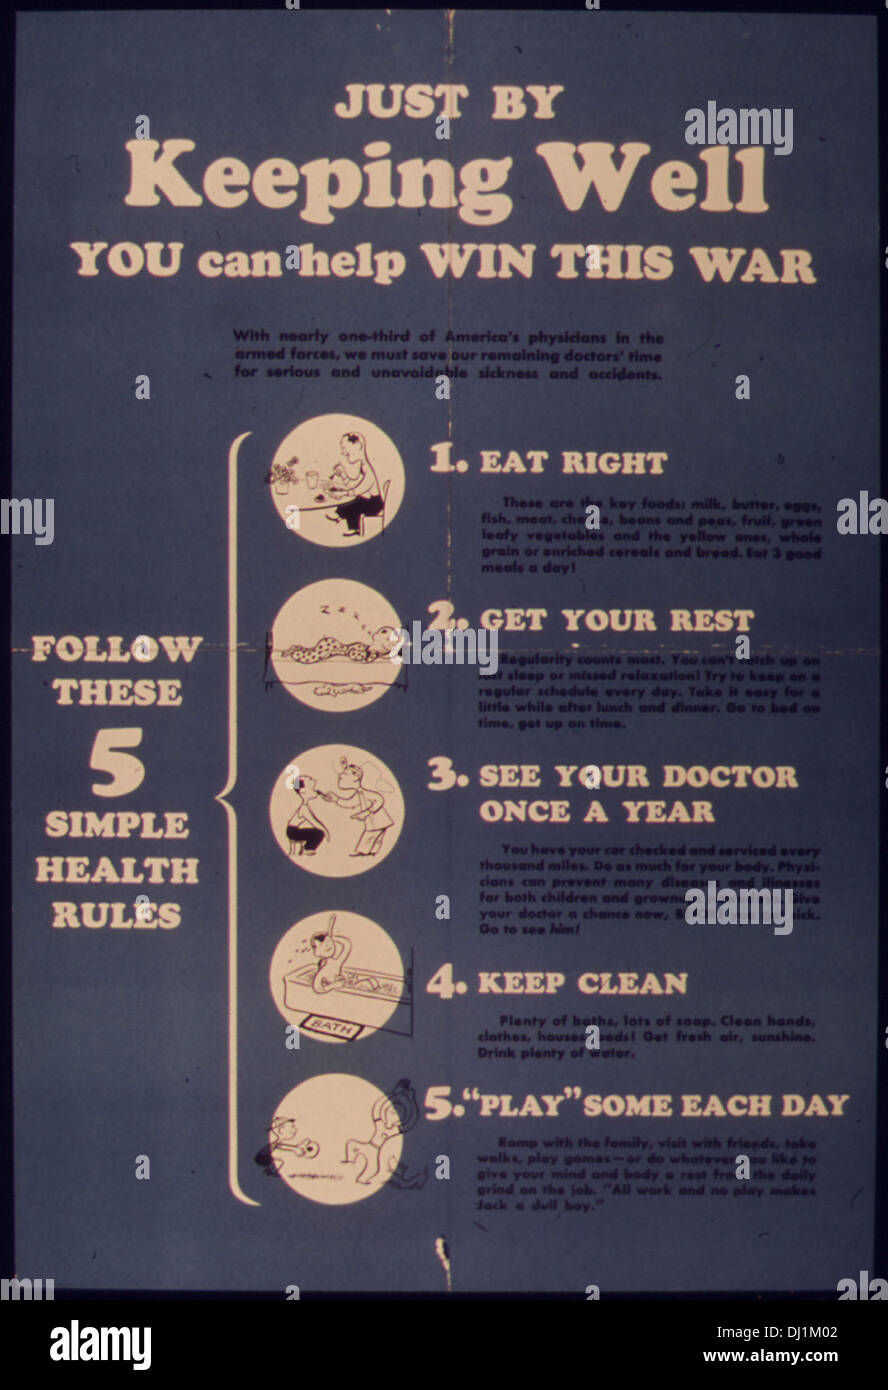 Just By Keeping Well You Can Help Win This War. Follow these five simple health rules. (1) Eat right, (2) Get your... 753 Stock Photo